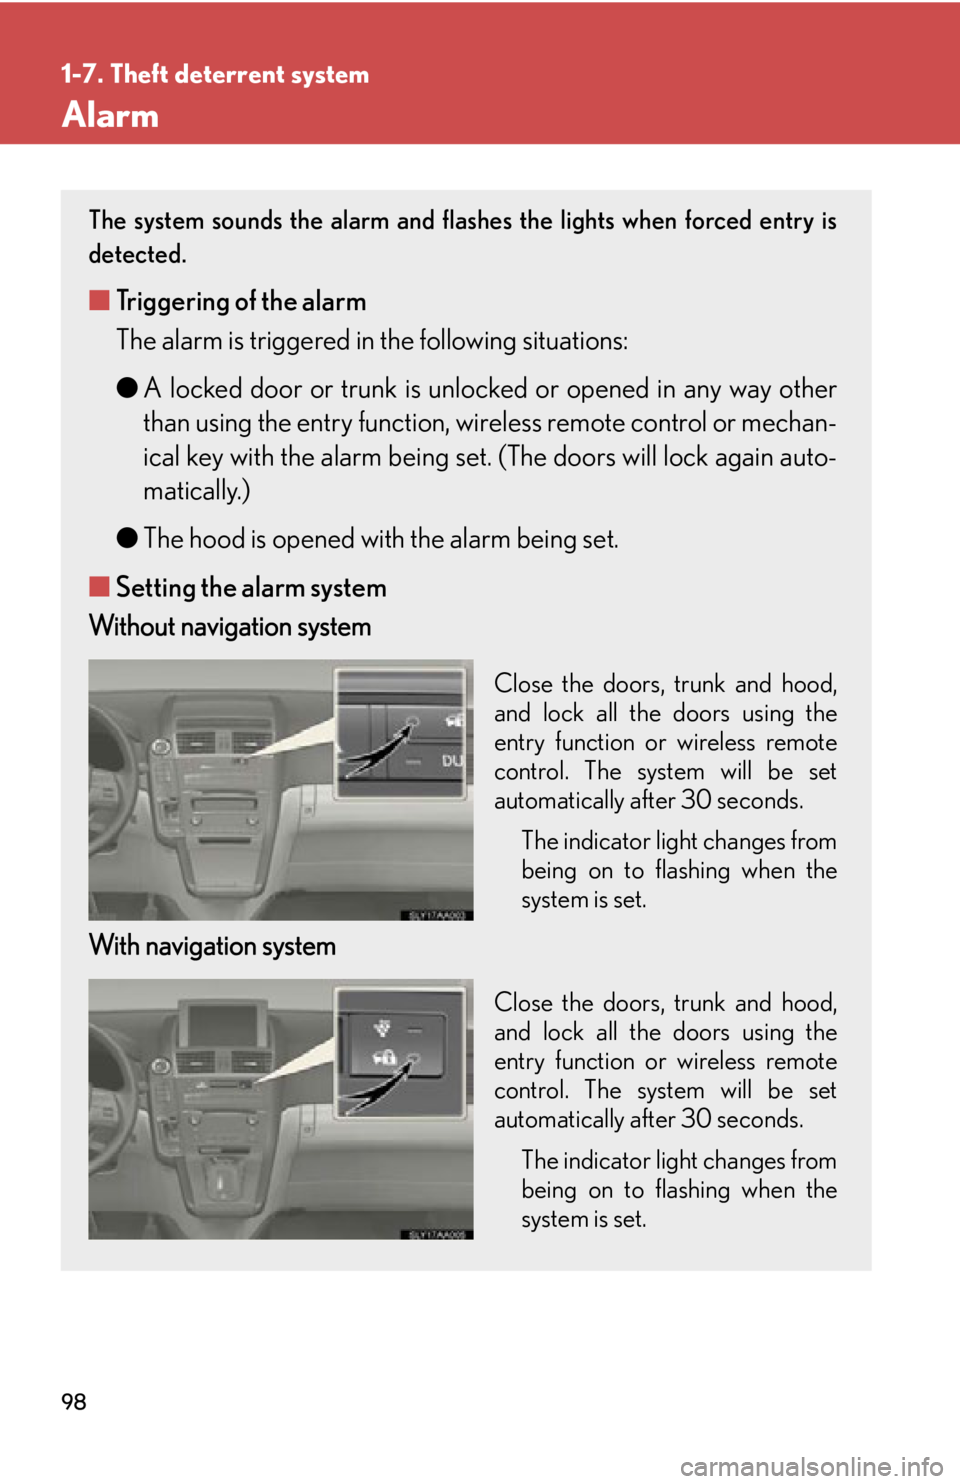 Lexus HS250h 2010  Setup / LEXUS 2010 HS250H OWNERS MANUAL (OM75006U) 98
1-7. Theft deterrent system
Alarm
The system sounds the alarm and flashes the lights when forced entry is 
detected.
■Triggering of the alarm
The alarm is triggered in the following situations:
�